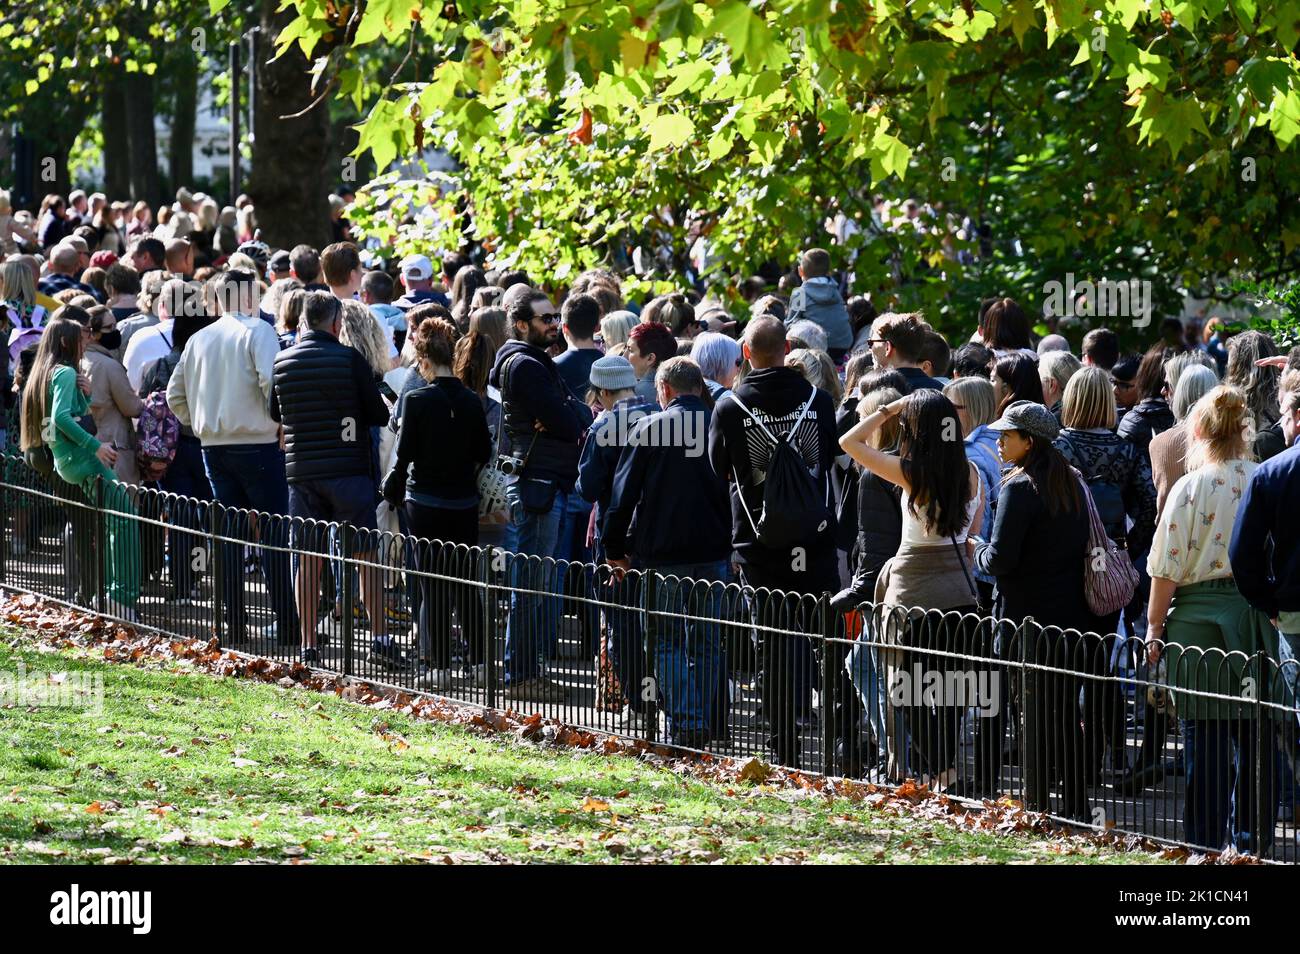 London, UK. Queues form as people leave St James's Park. Members of the public continued to leave bouquets in the Royal Parks in tribute to Queen Elizabeth II. Credit: michael melia/Alamy Live News Stock Photo